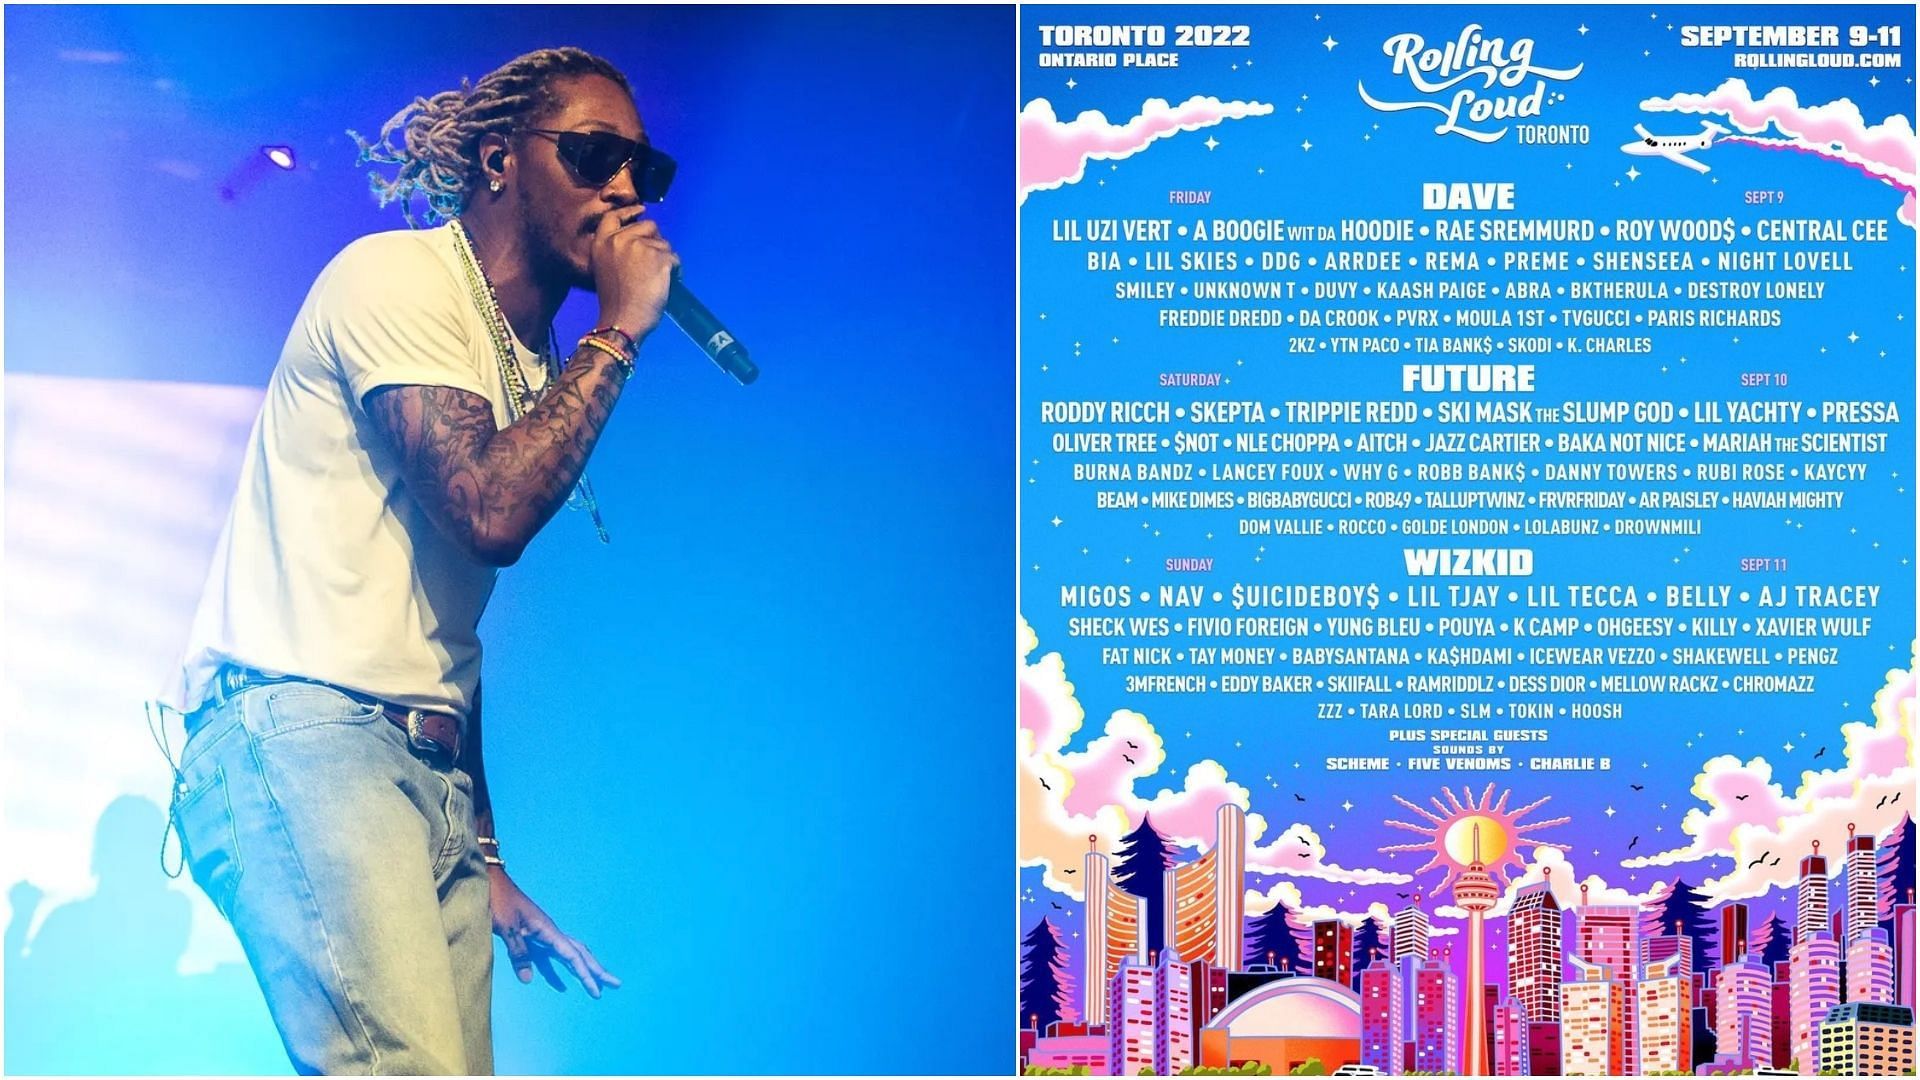 Future is among the headliners at the Rolling Loud Toronto festival this year. (Images via David Wolff-Patrick / Getty and Instagram / @rollingloud)